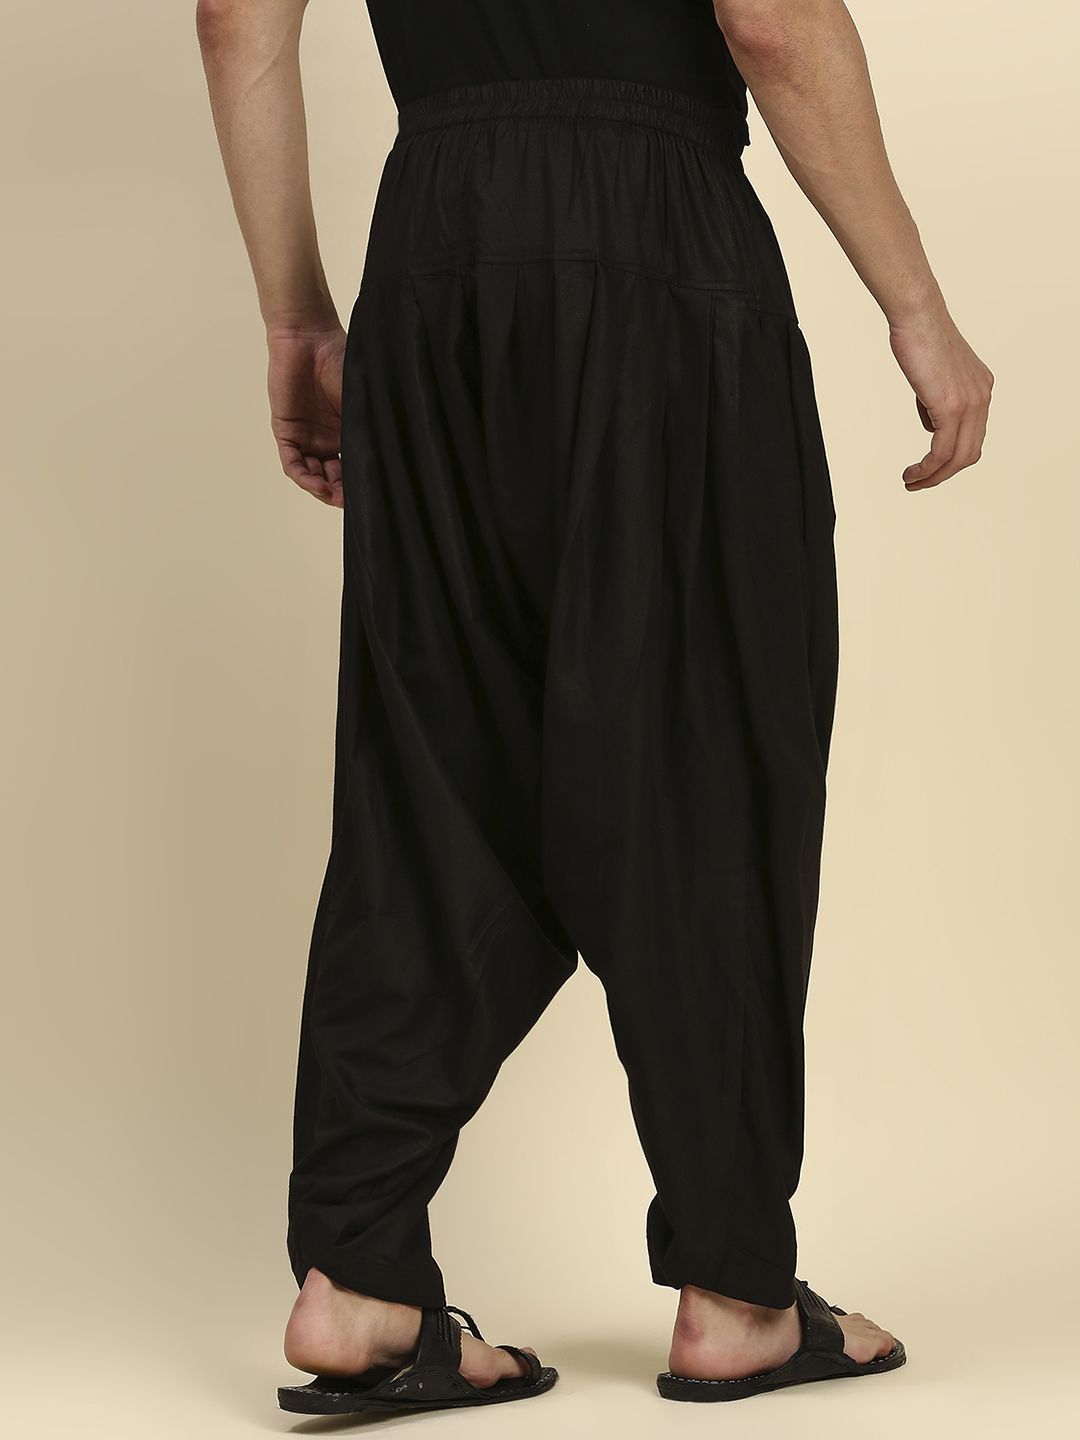 Buy online Black Patiala Pants from Churidars  Salwars for Women by  Myaddiction for 799 at 0 off  2023 Limeroadcom